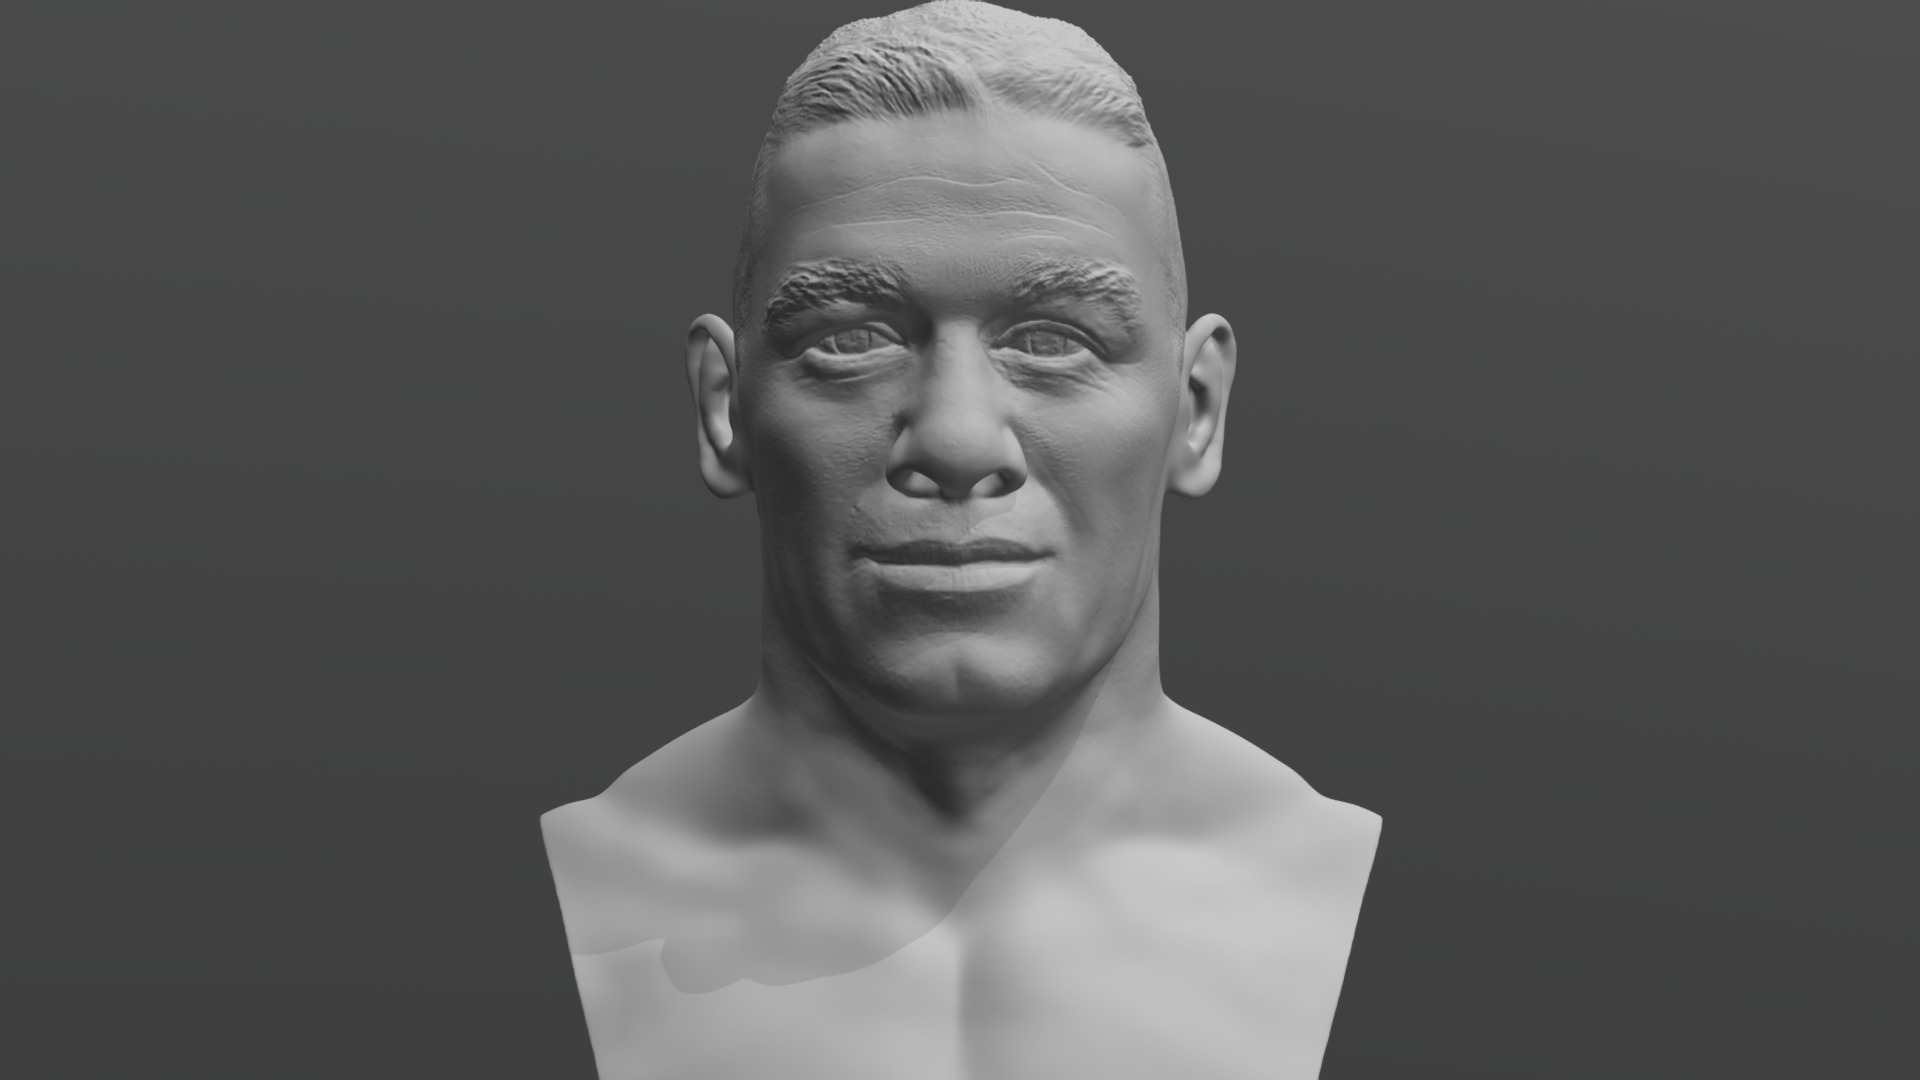 3D model John Cena bust for 3D printing - This is a 3D model of the John Cena bust for 3D printing. The 3D model is about a man with a serious expression.